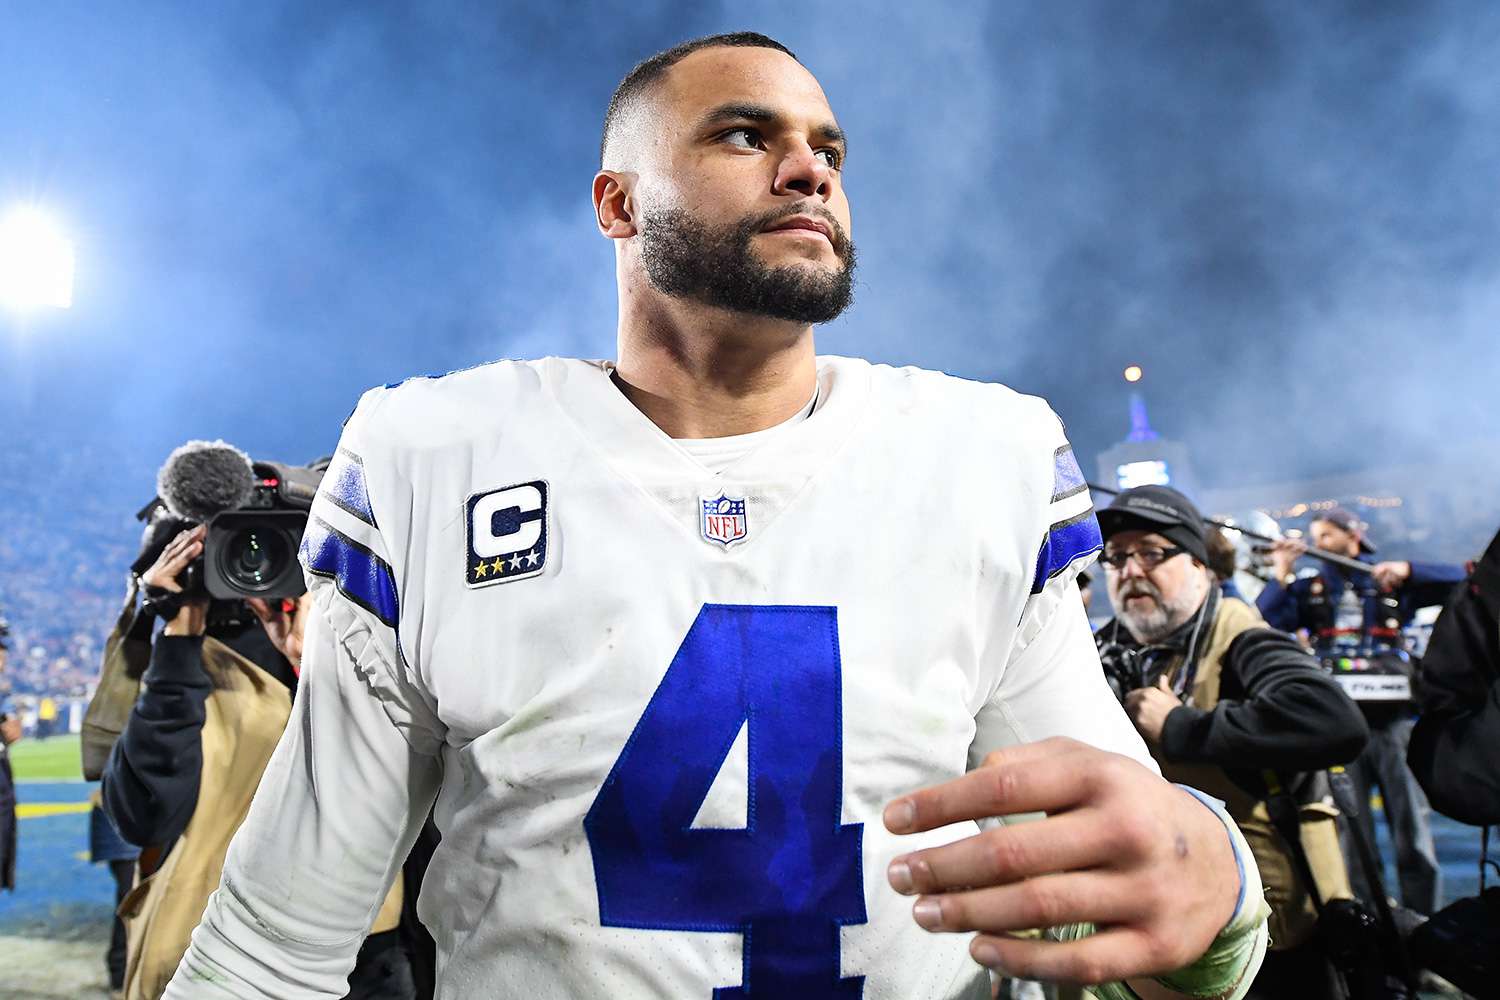  Shaking Up the Gridiron Giants' Potential Power Moves with Dak Prescott and Bill Belichick